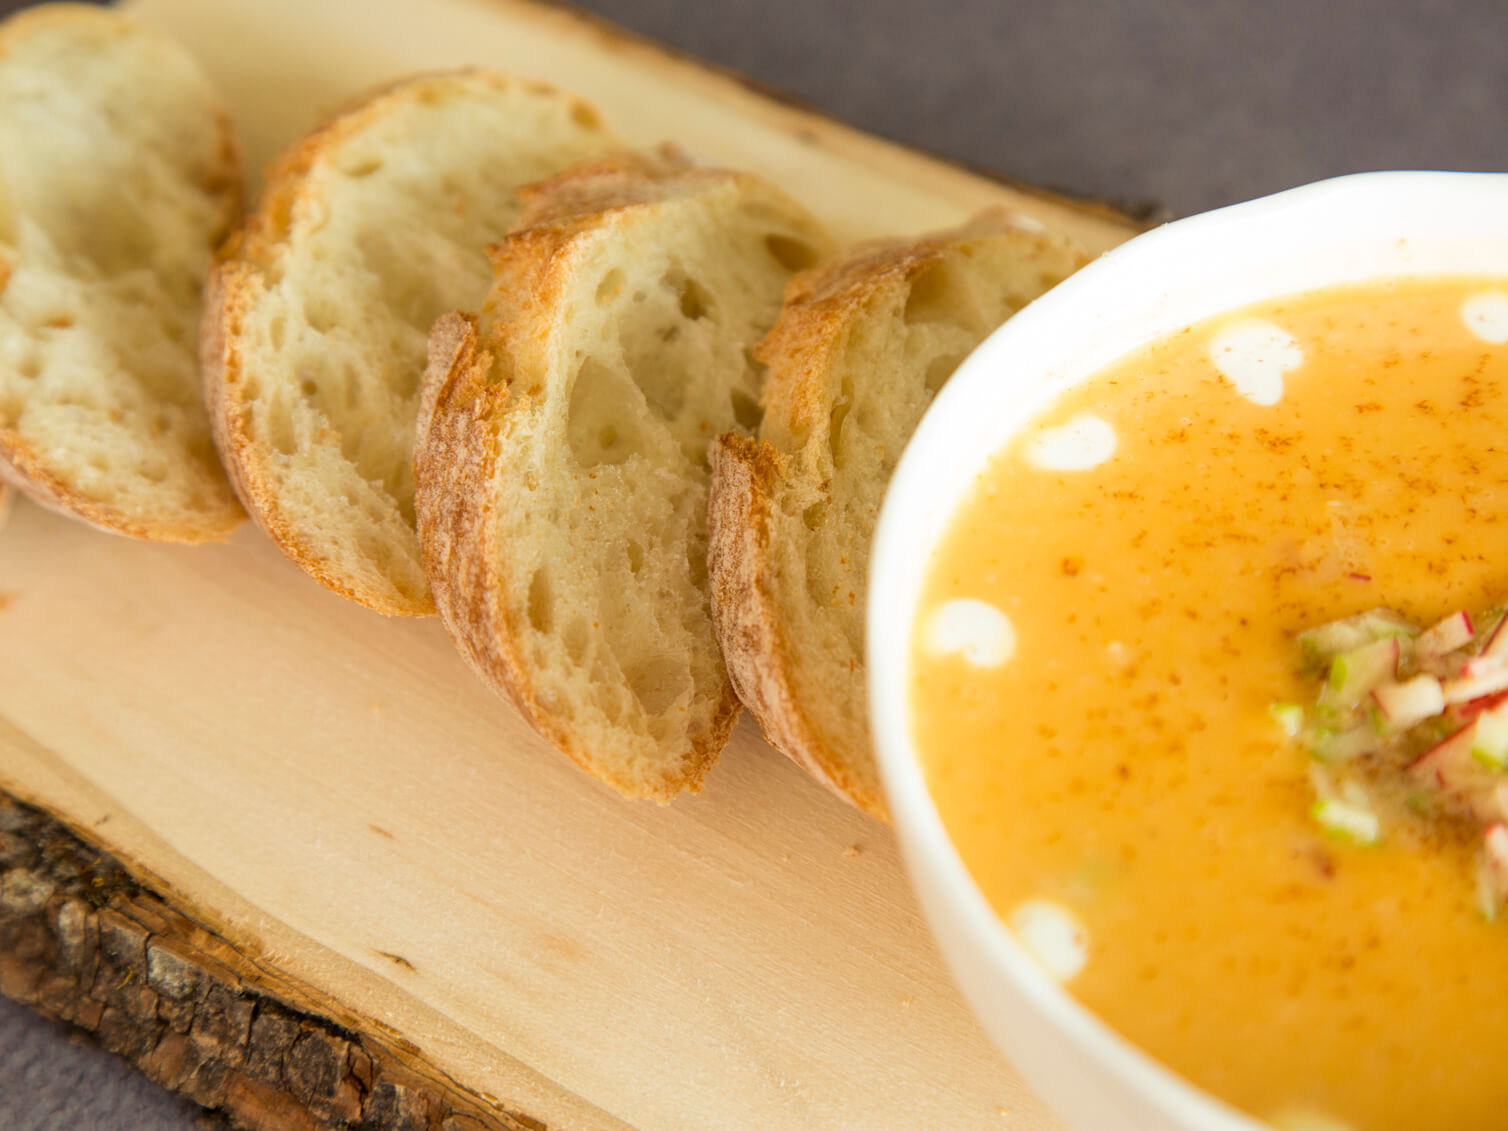 Serve the bread with a rustic baguette for dipping.